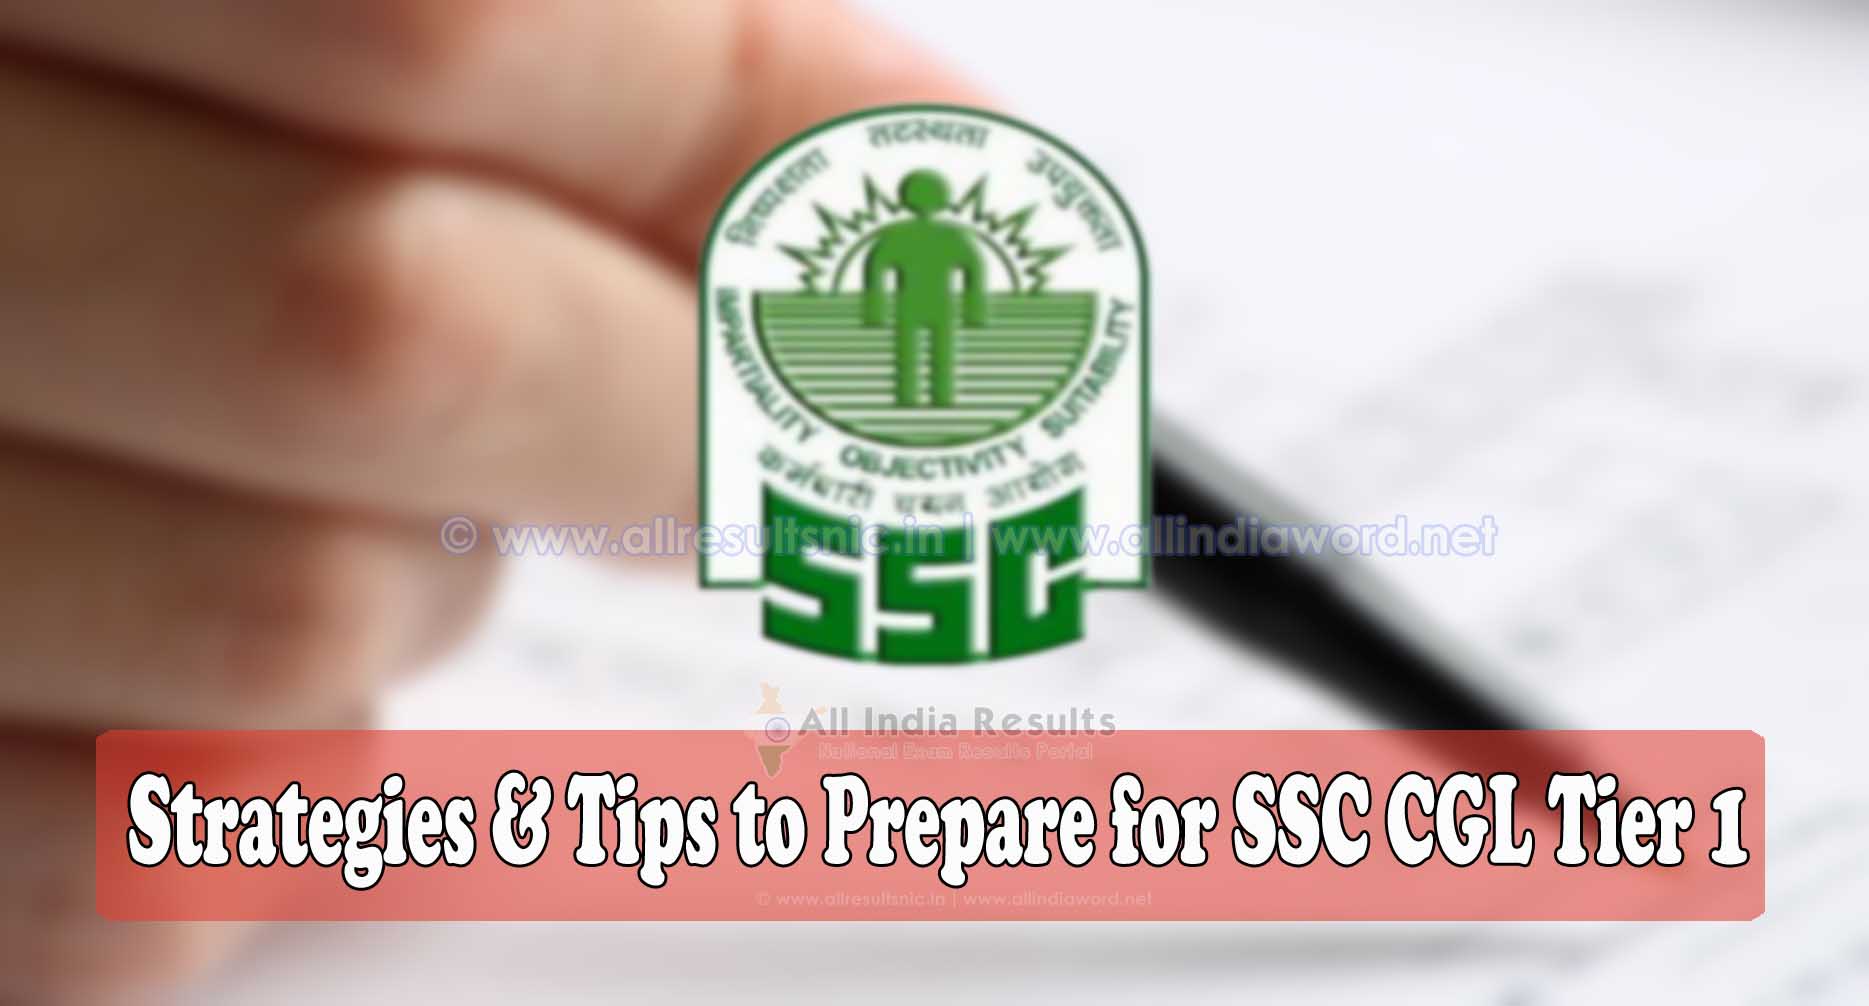 Strategies Tips to Prepare for SSC CGL Tier 1